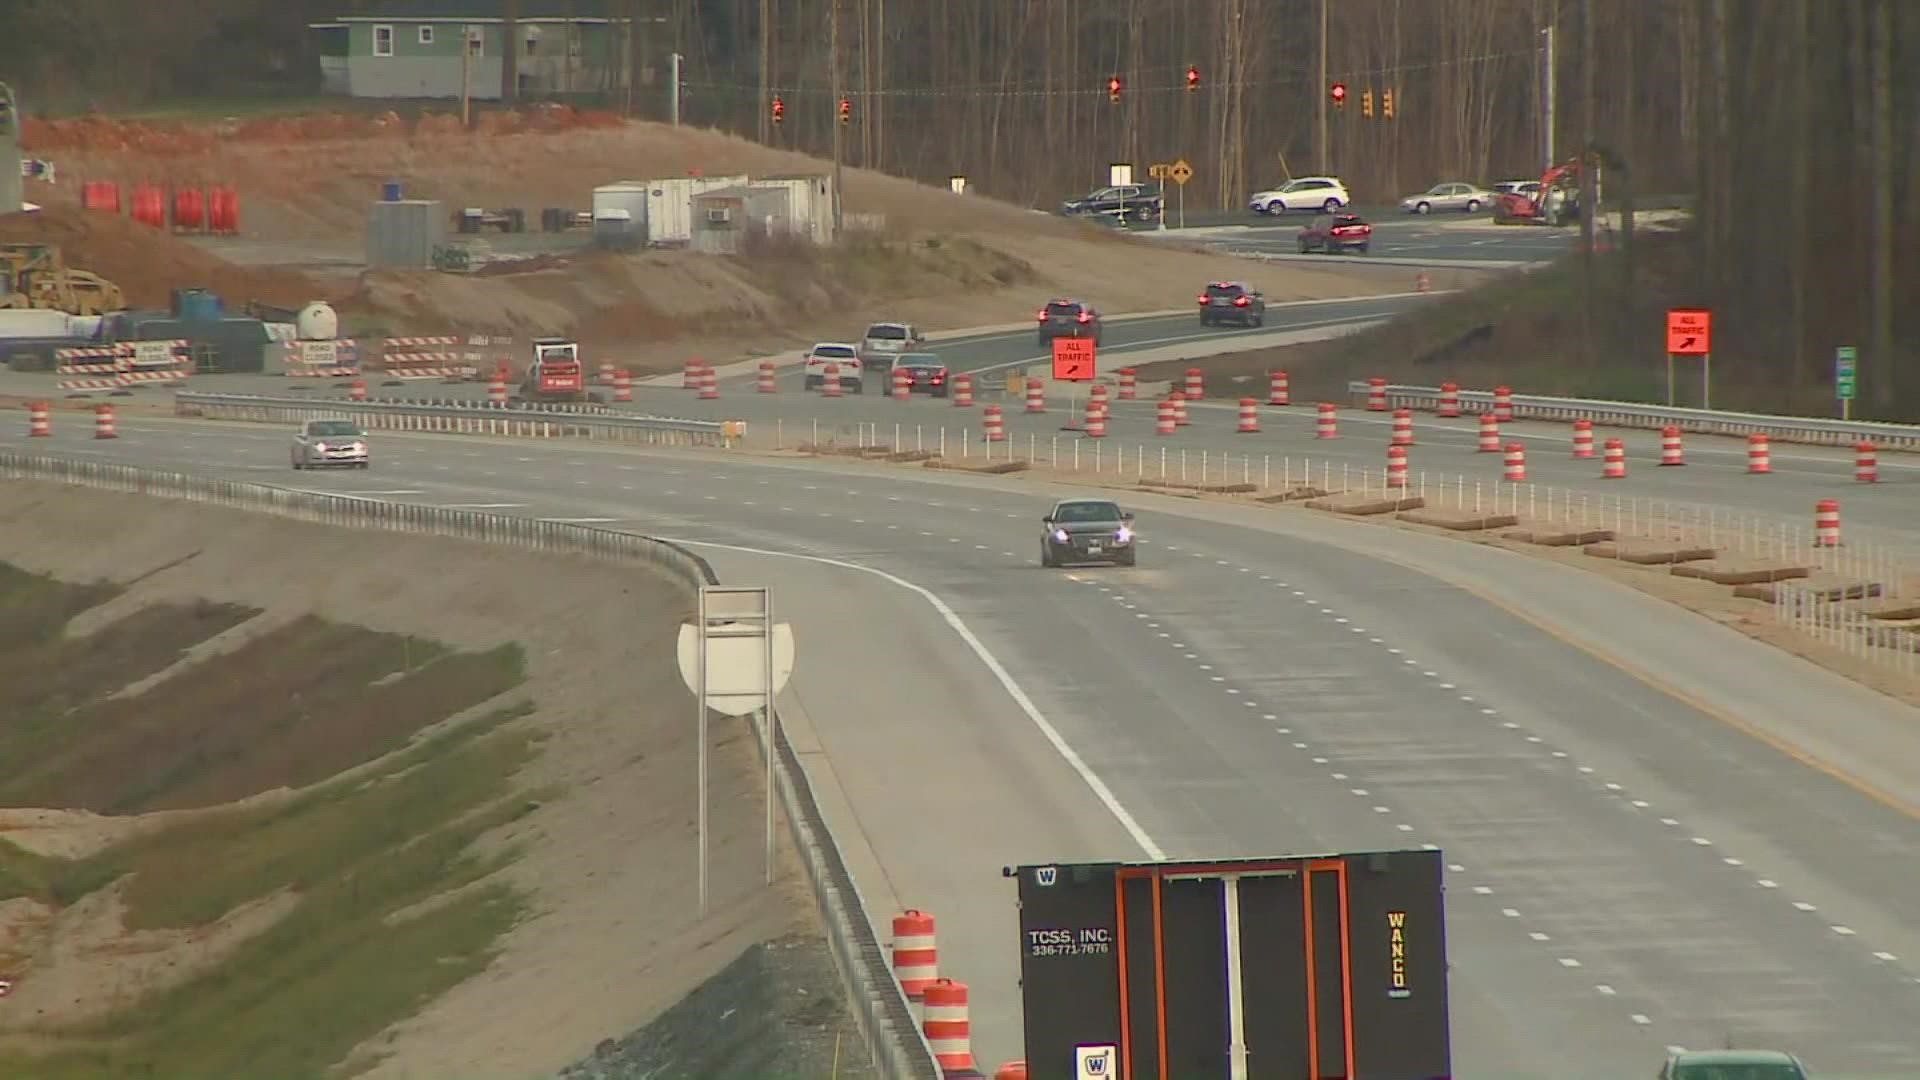 NCDOT engineers said crews have made steady progress on the urban loop, and it’s moving quicker than they expected.